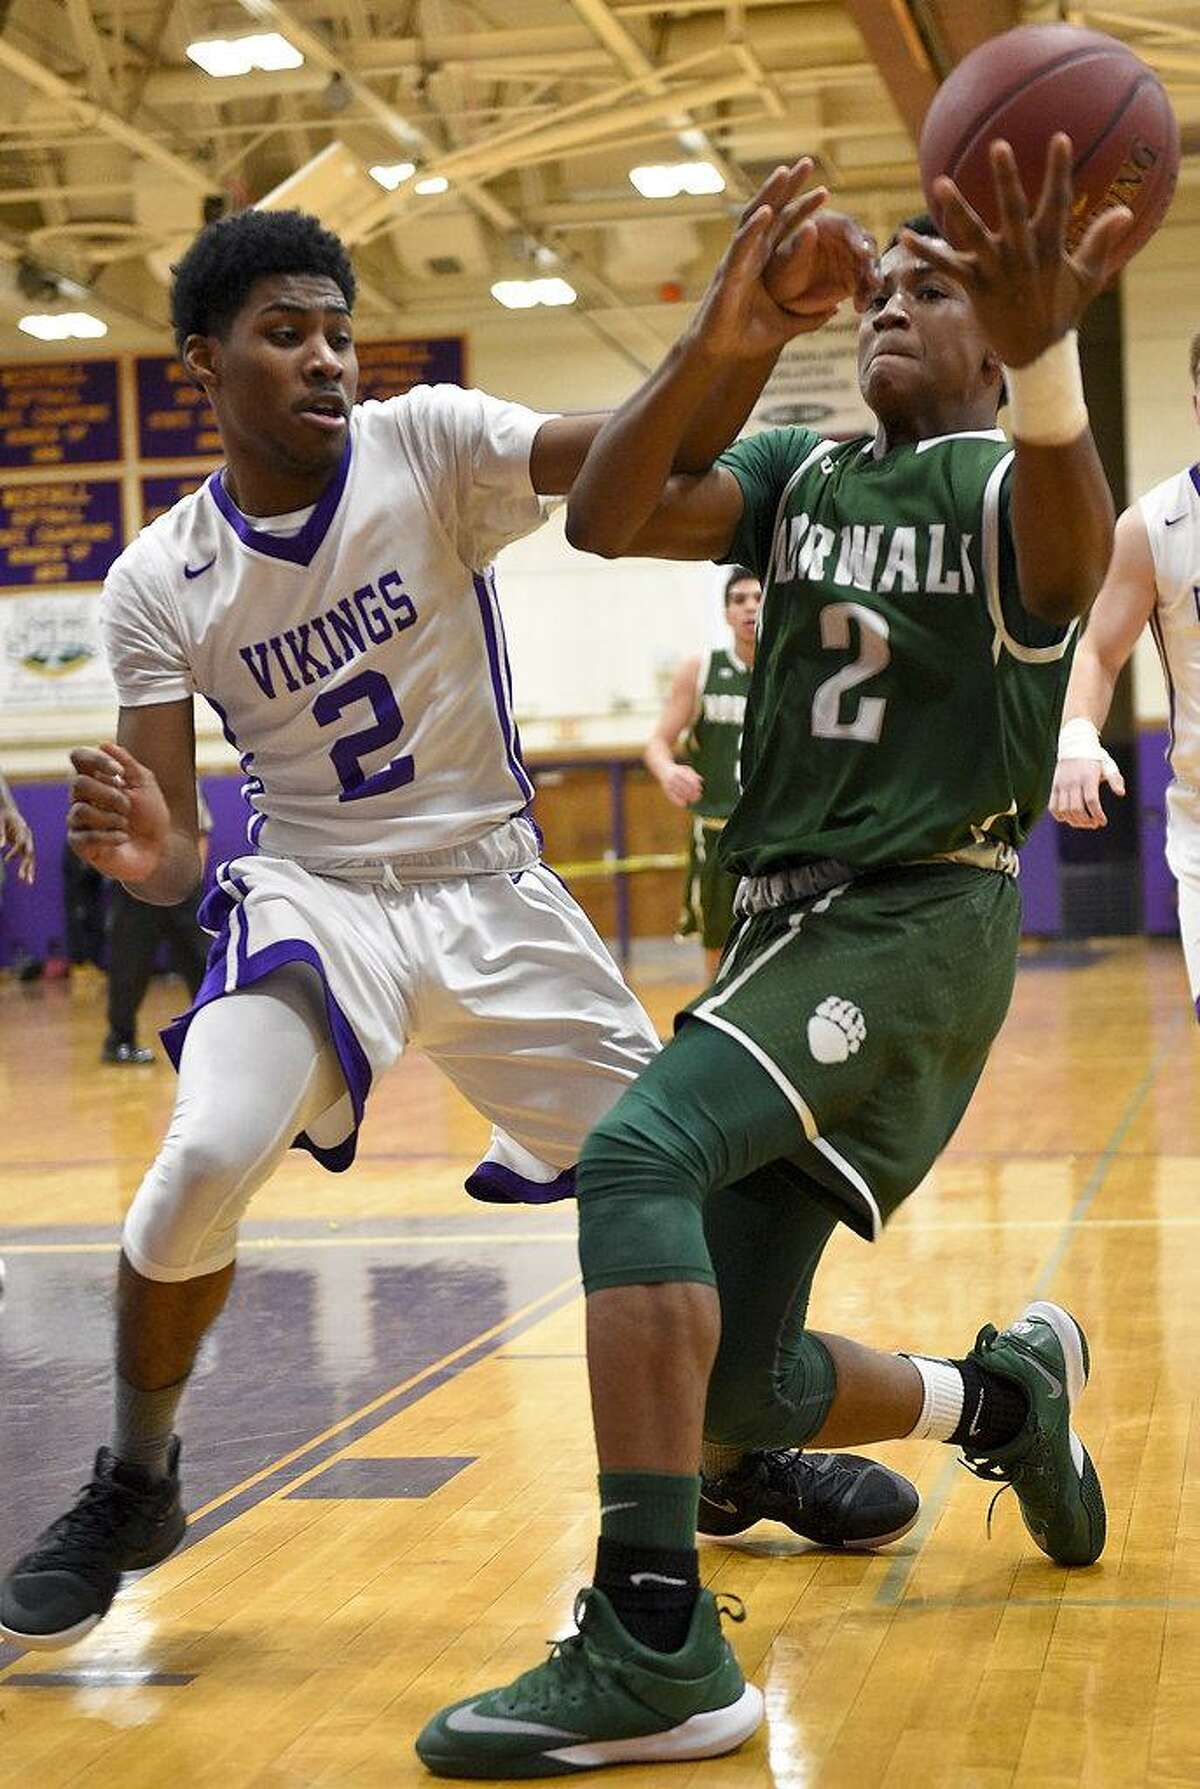 Westhill Rashawn Gibson (2) reachs in knocking the ball loose on Norwalk's Zyaire Sellers (2) drive during a FCIAC boys basketball game at Westhill High School in Stamford, Conn. on Tuesday, Jan. 9, 2018.